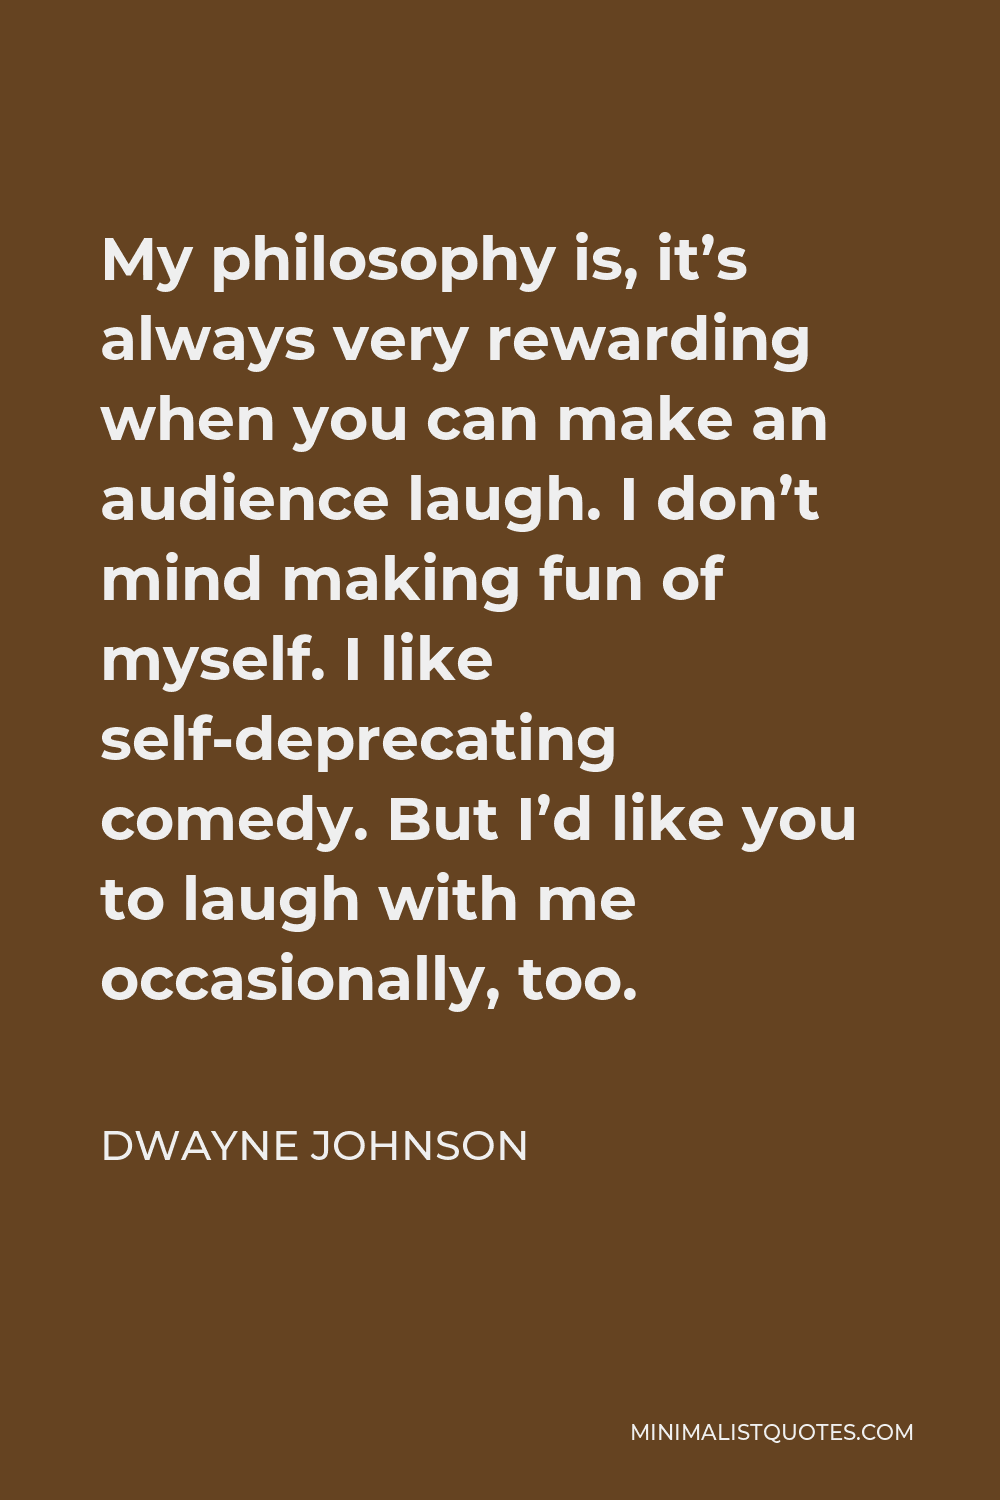 Dwayne Johnson Quote - My philosophy is, it’s always very rewarding when you can make an audience laugh. I don’t mind making fun of myself. I like self-deprecating comedy. But I’d like you to laugh with me occasionally, too.